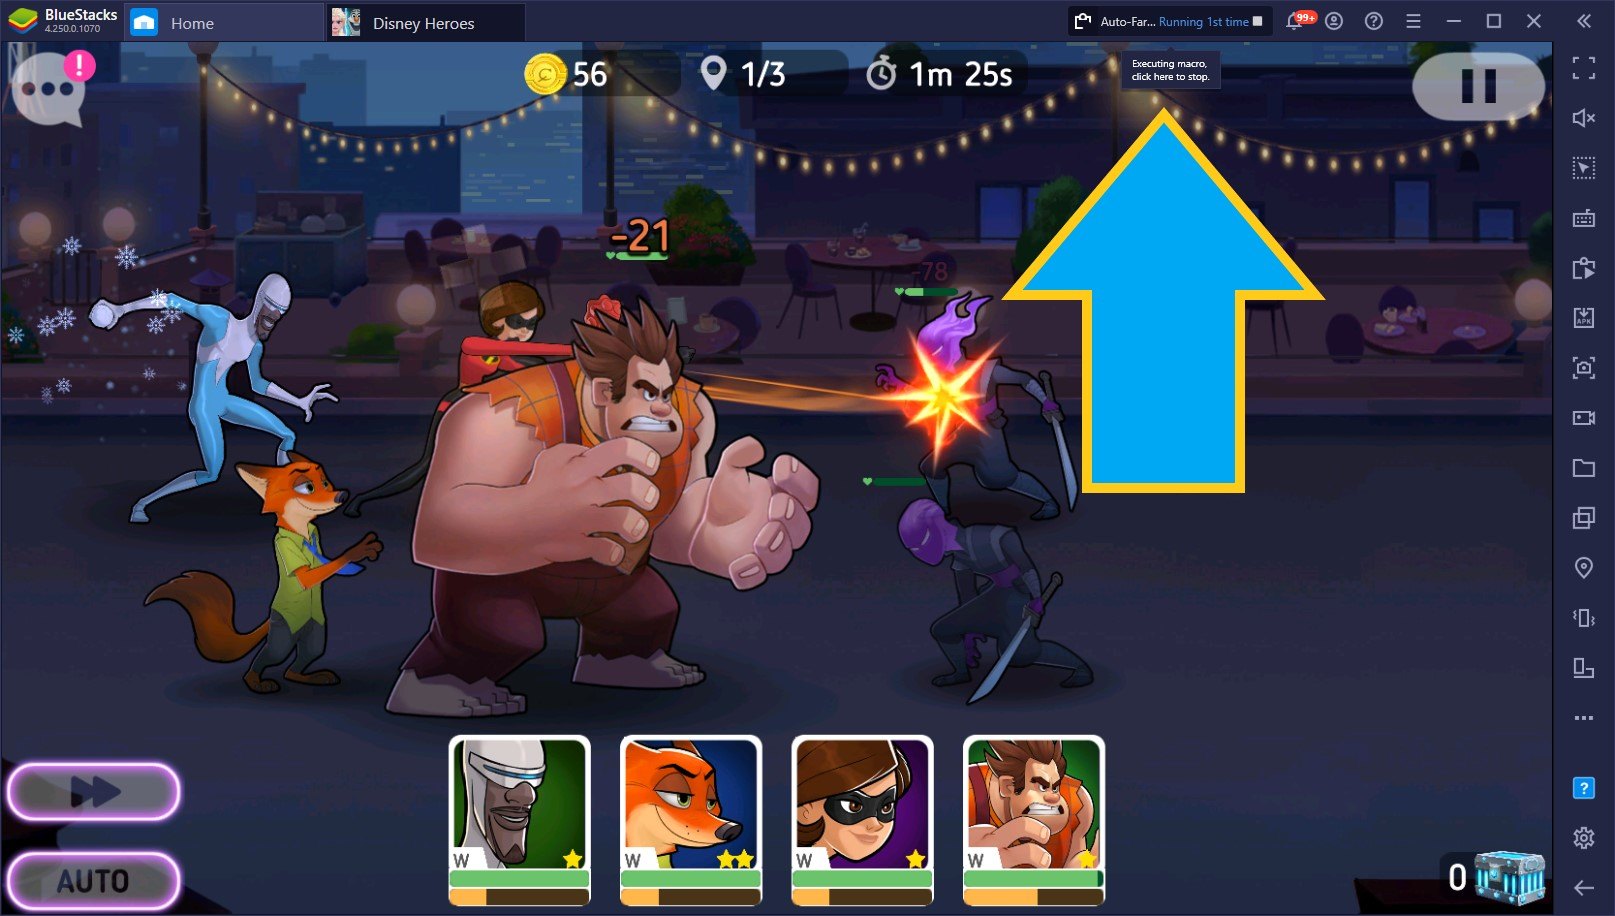 Disney Heroes: Battle Mode on PC - Play on BlueStacks and Get Access to Exclusive Tools and Features